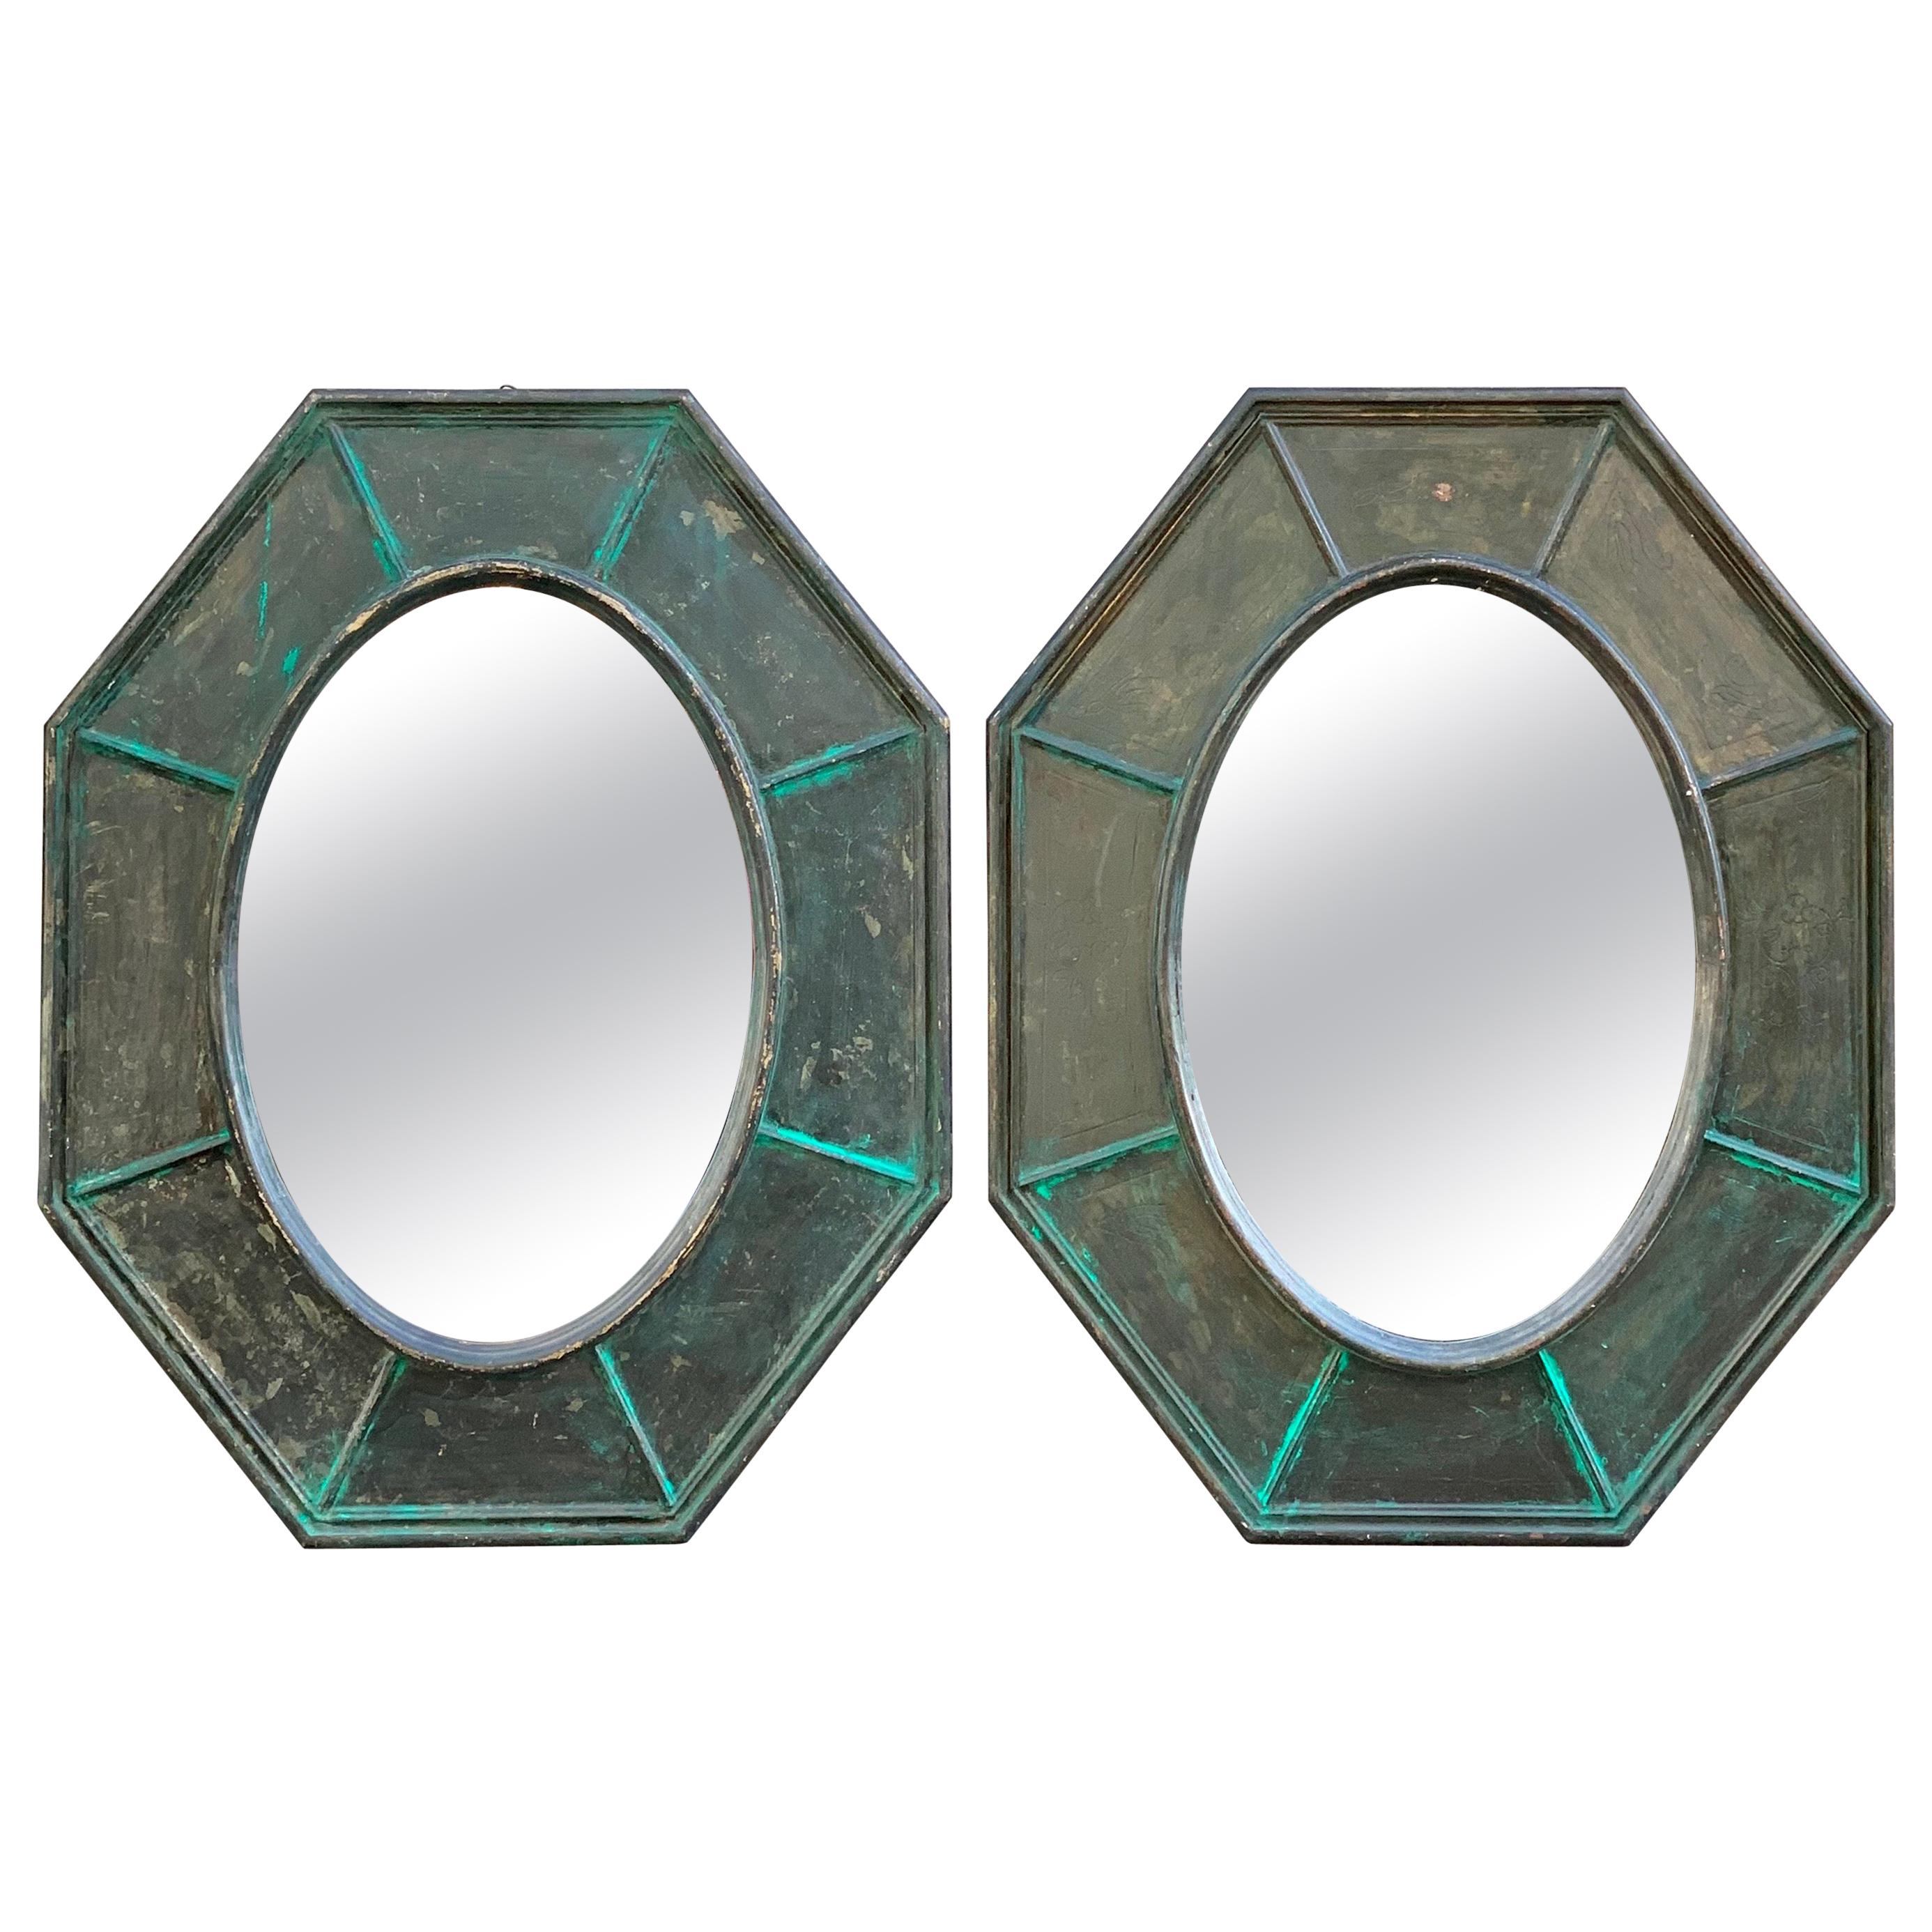 Pair of Octagonal Green Wood Mirrors Decorated with Metallic Effect, Early '900